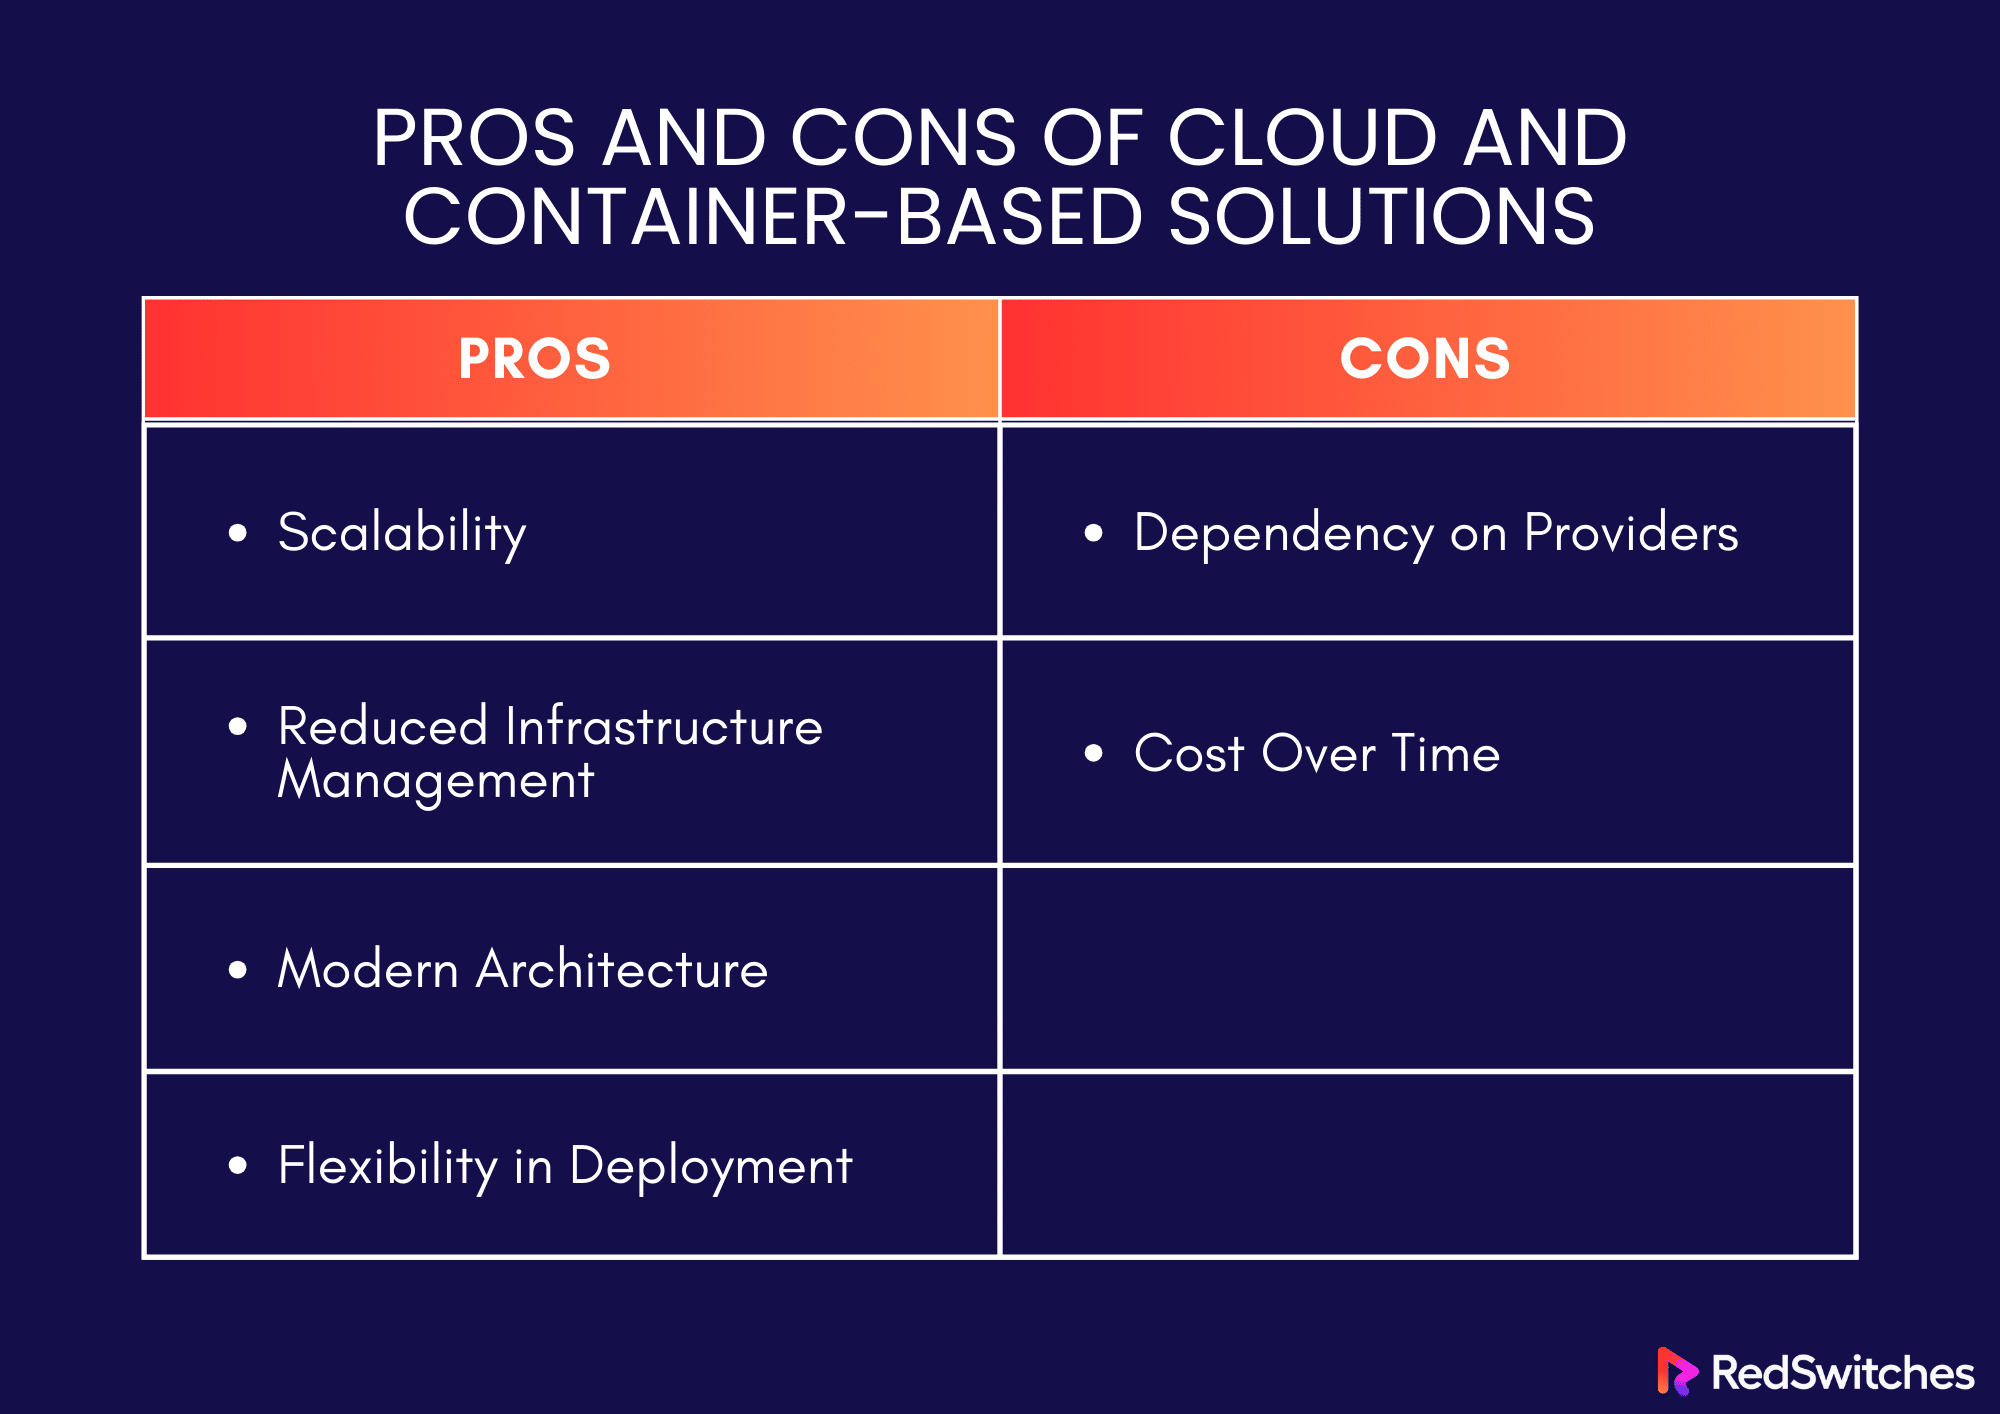 Pros and Cons of Cloud and Container-Based Solutions